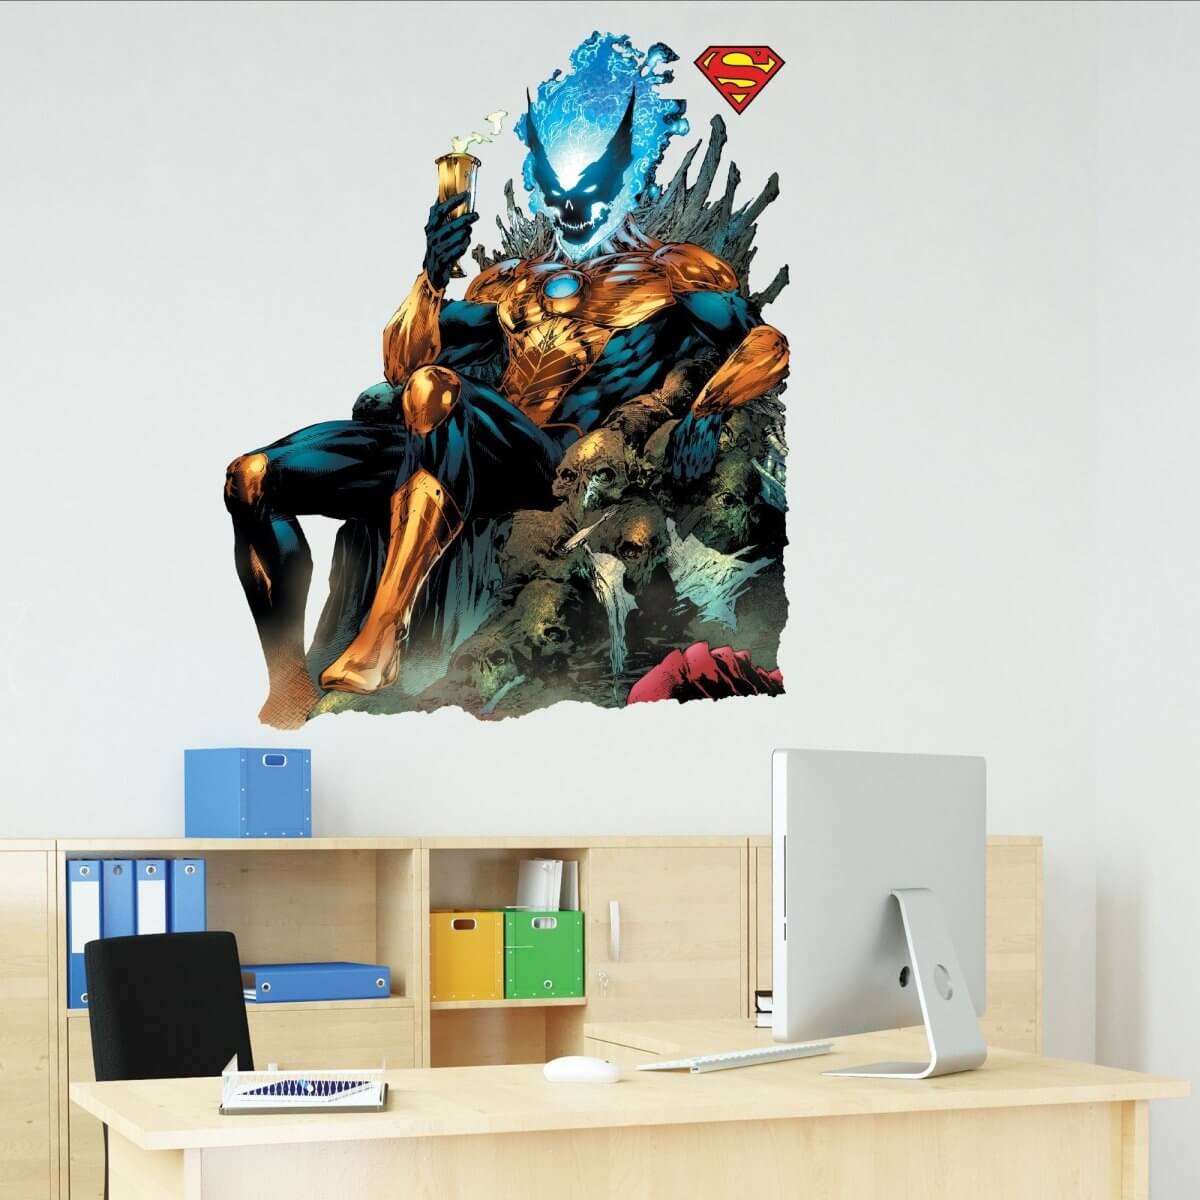 Kismet Decals New 52 Superman #27 Pg. 20 Comic Cover Series Licensed Wall Sticker - Easy DIY Home & Room Decor Wall Art - Kismet Decals